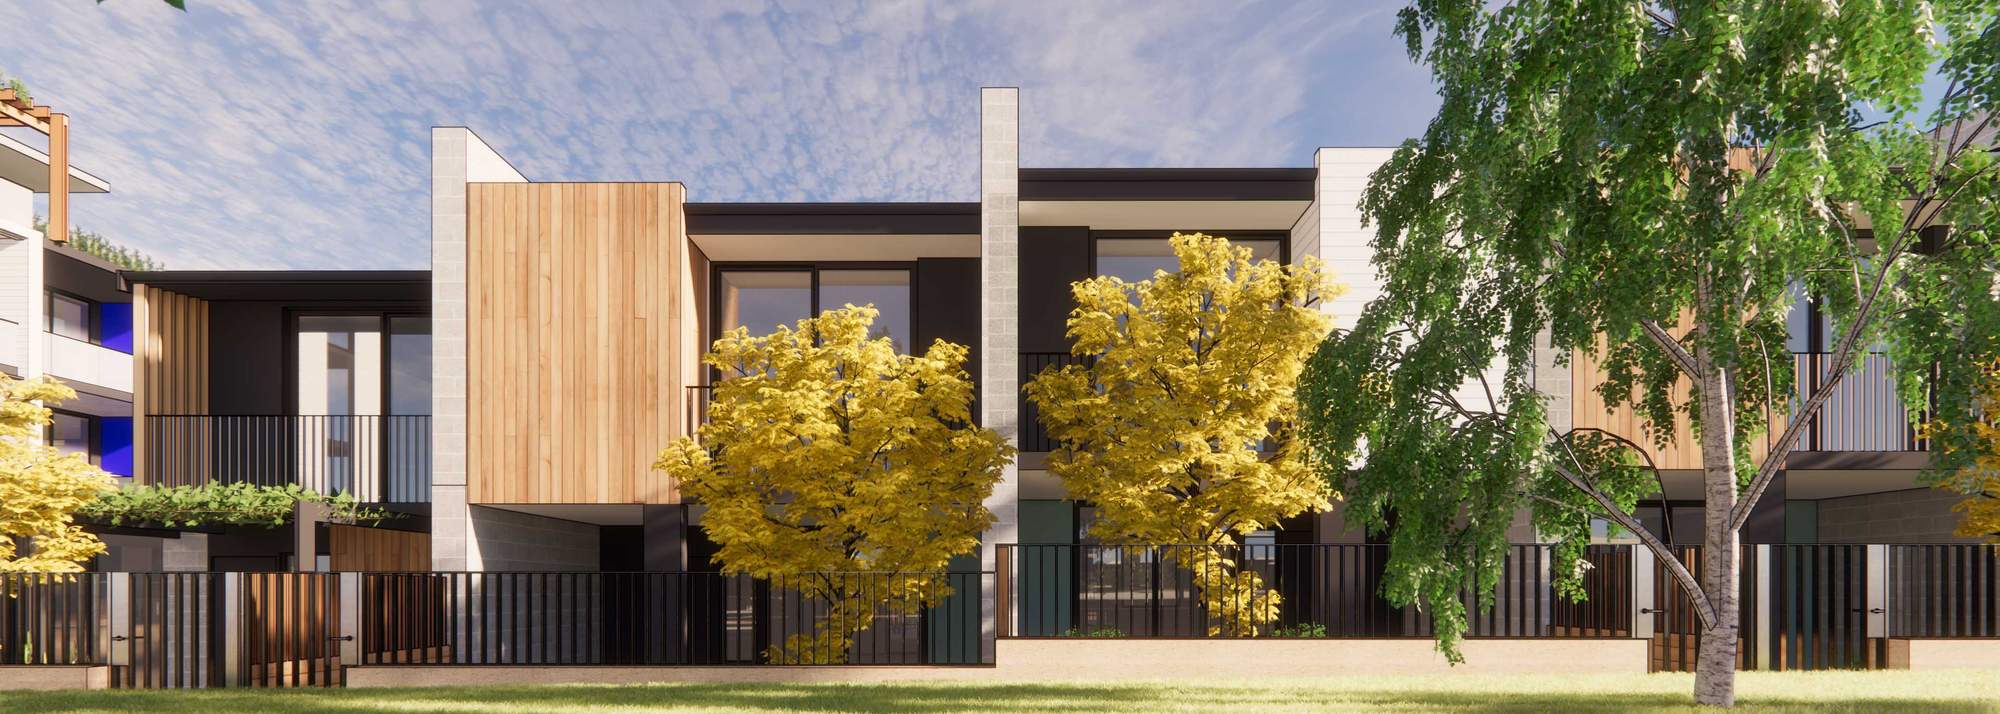 Gallery, Willagee, artist impression of town home living